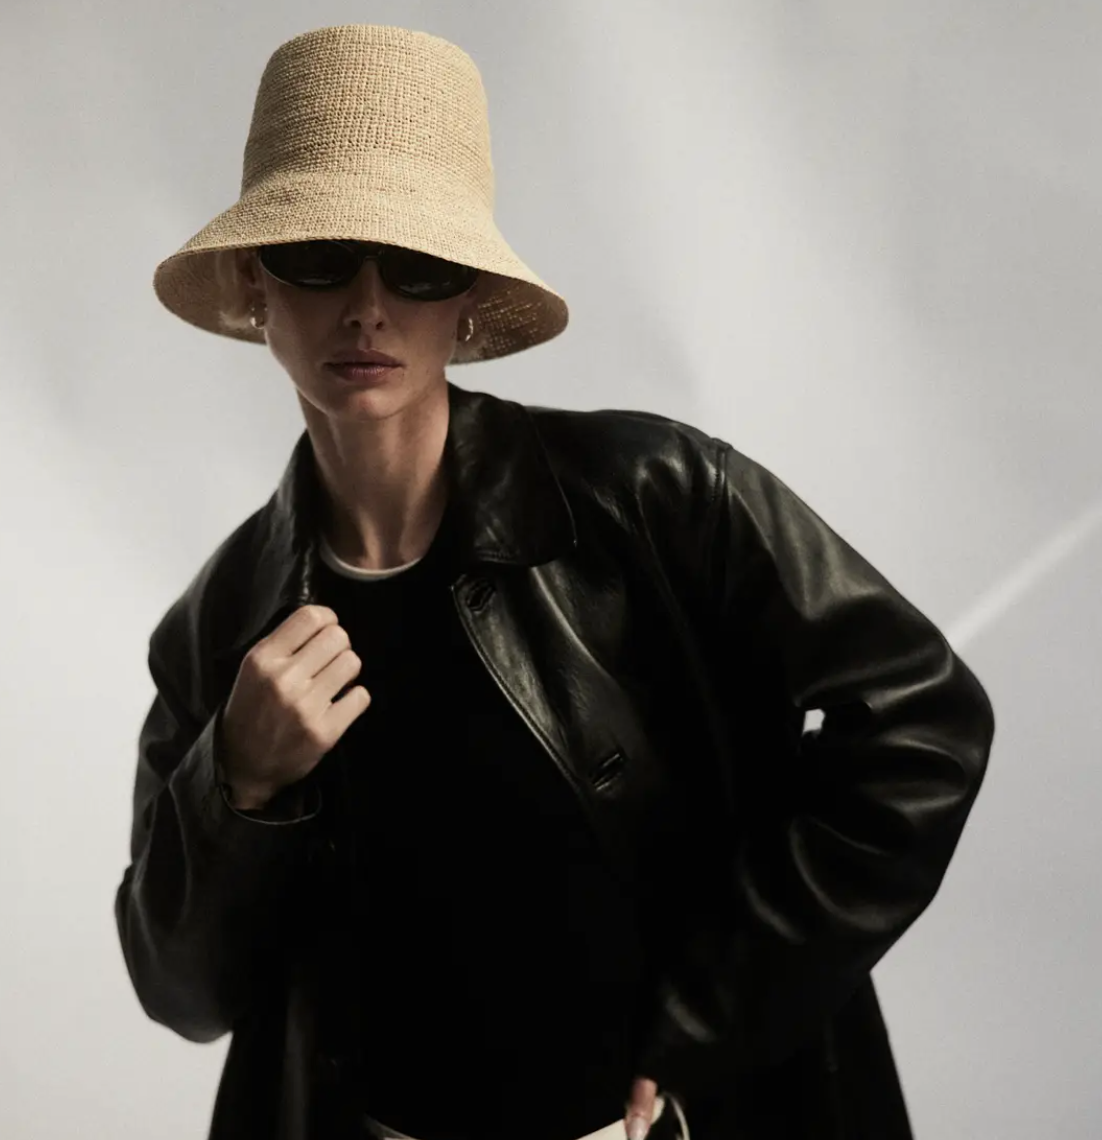 A stylish person wearing a Janessa Leone FELIX BUCKET NATURAL straw hat, sunglasses, and a black leather jacket, posing with attitude against an Arizona-themed background.